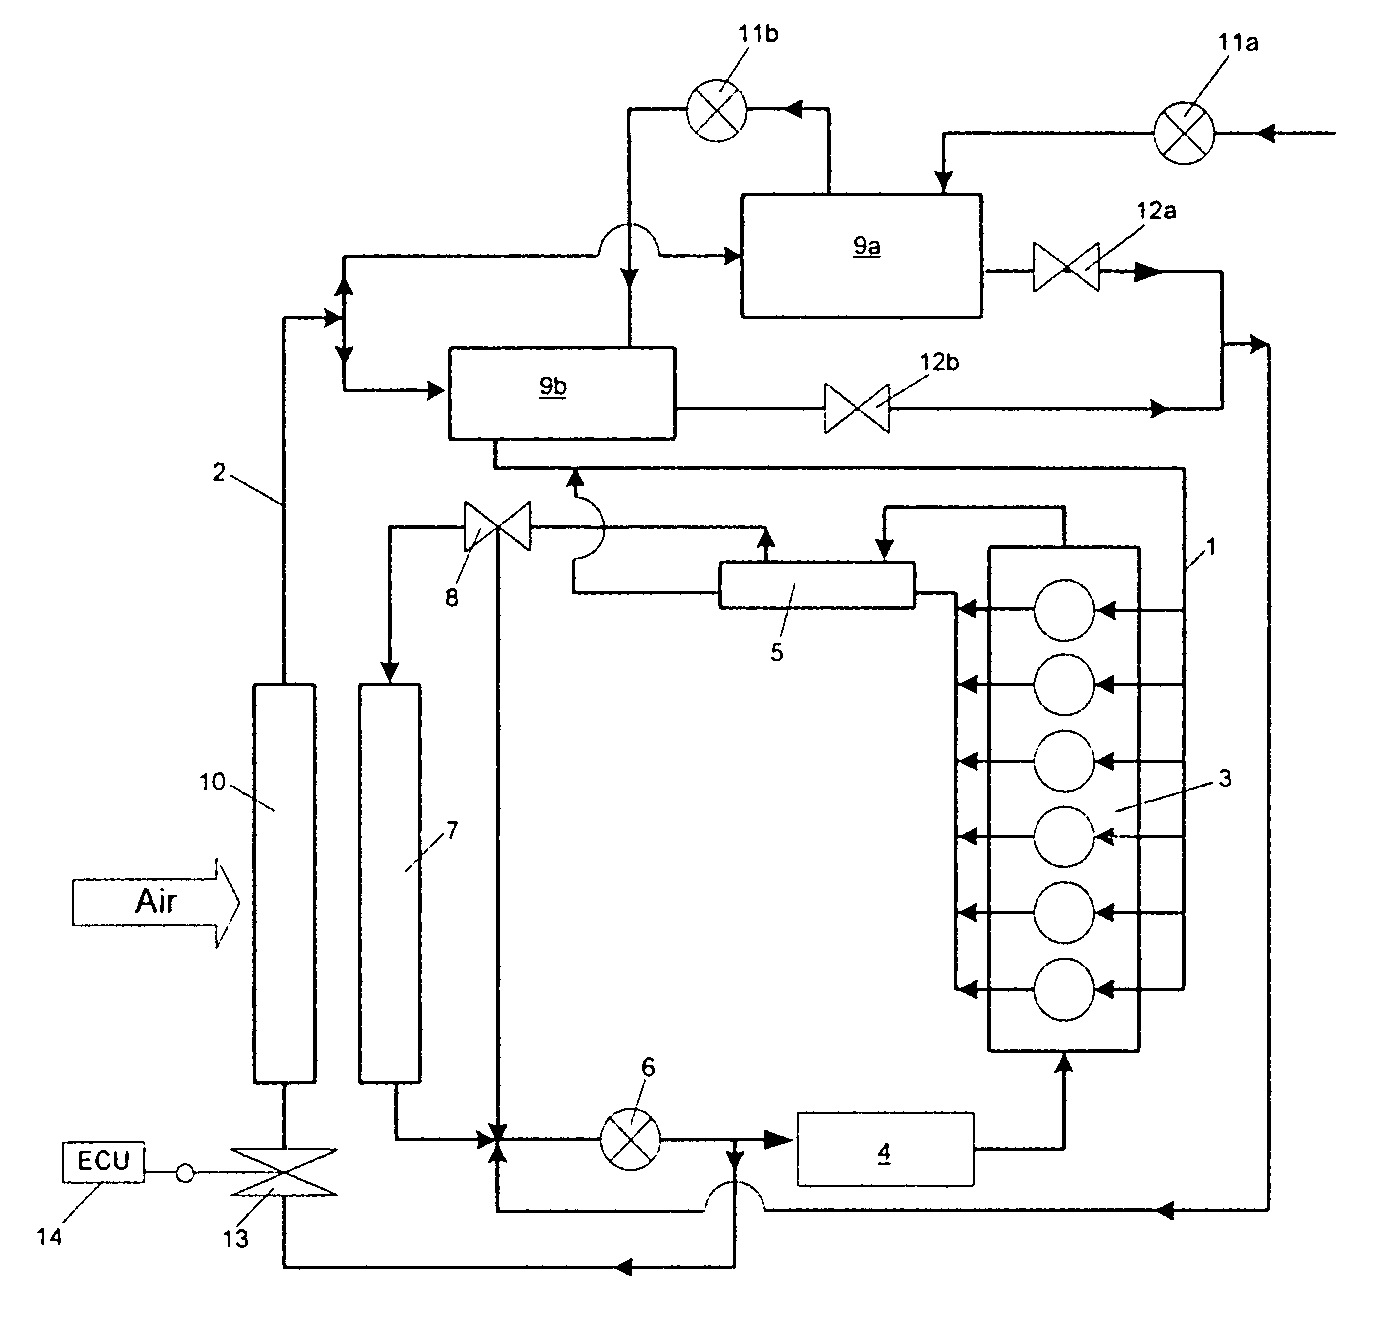 Cooling system of an internal combustion engine having charge air feed